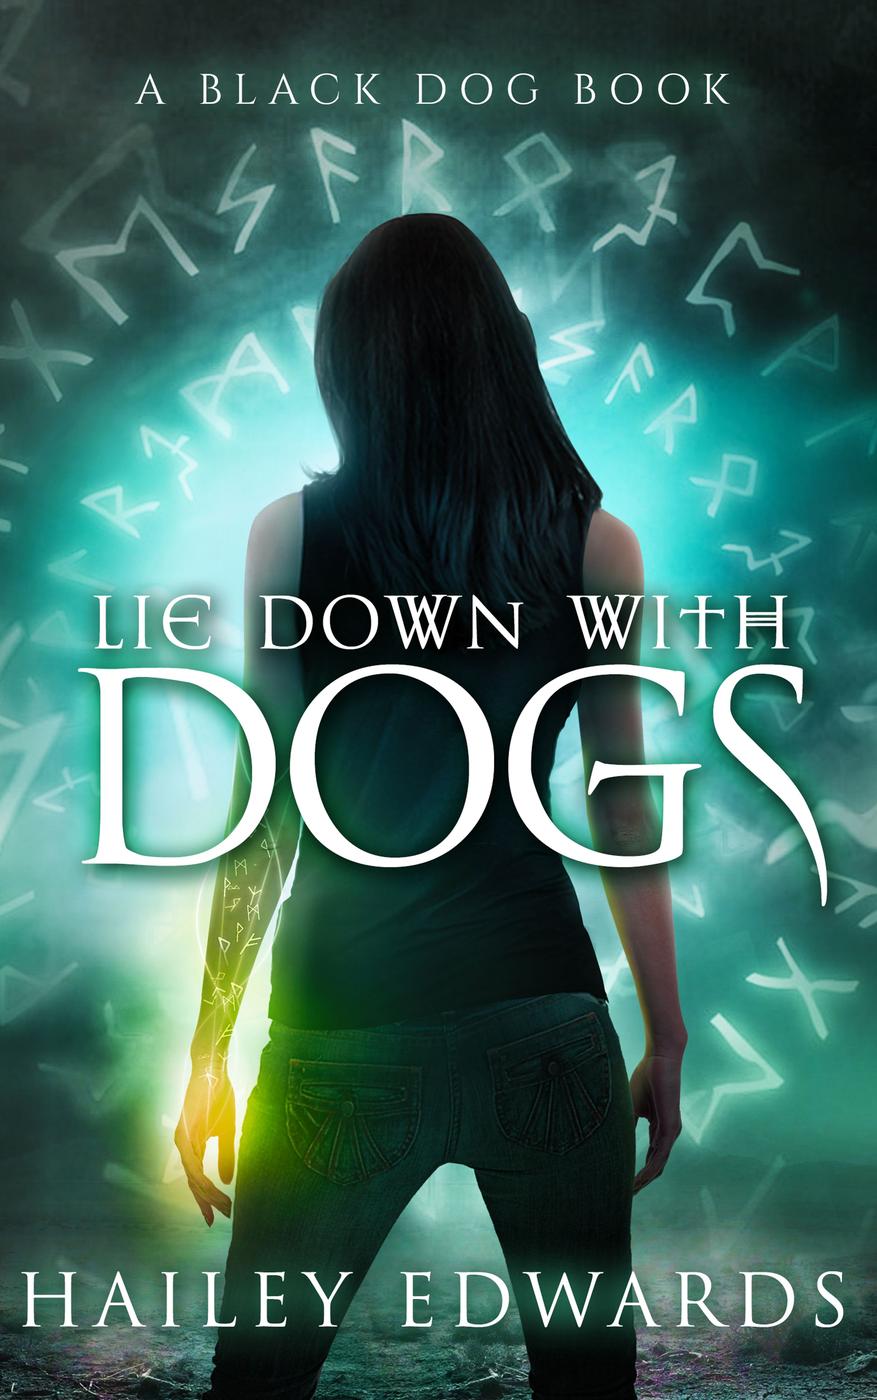 Lie Down with Dogs (2015) by Hailey Edwards